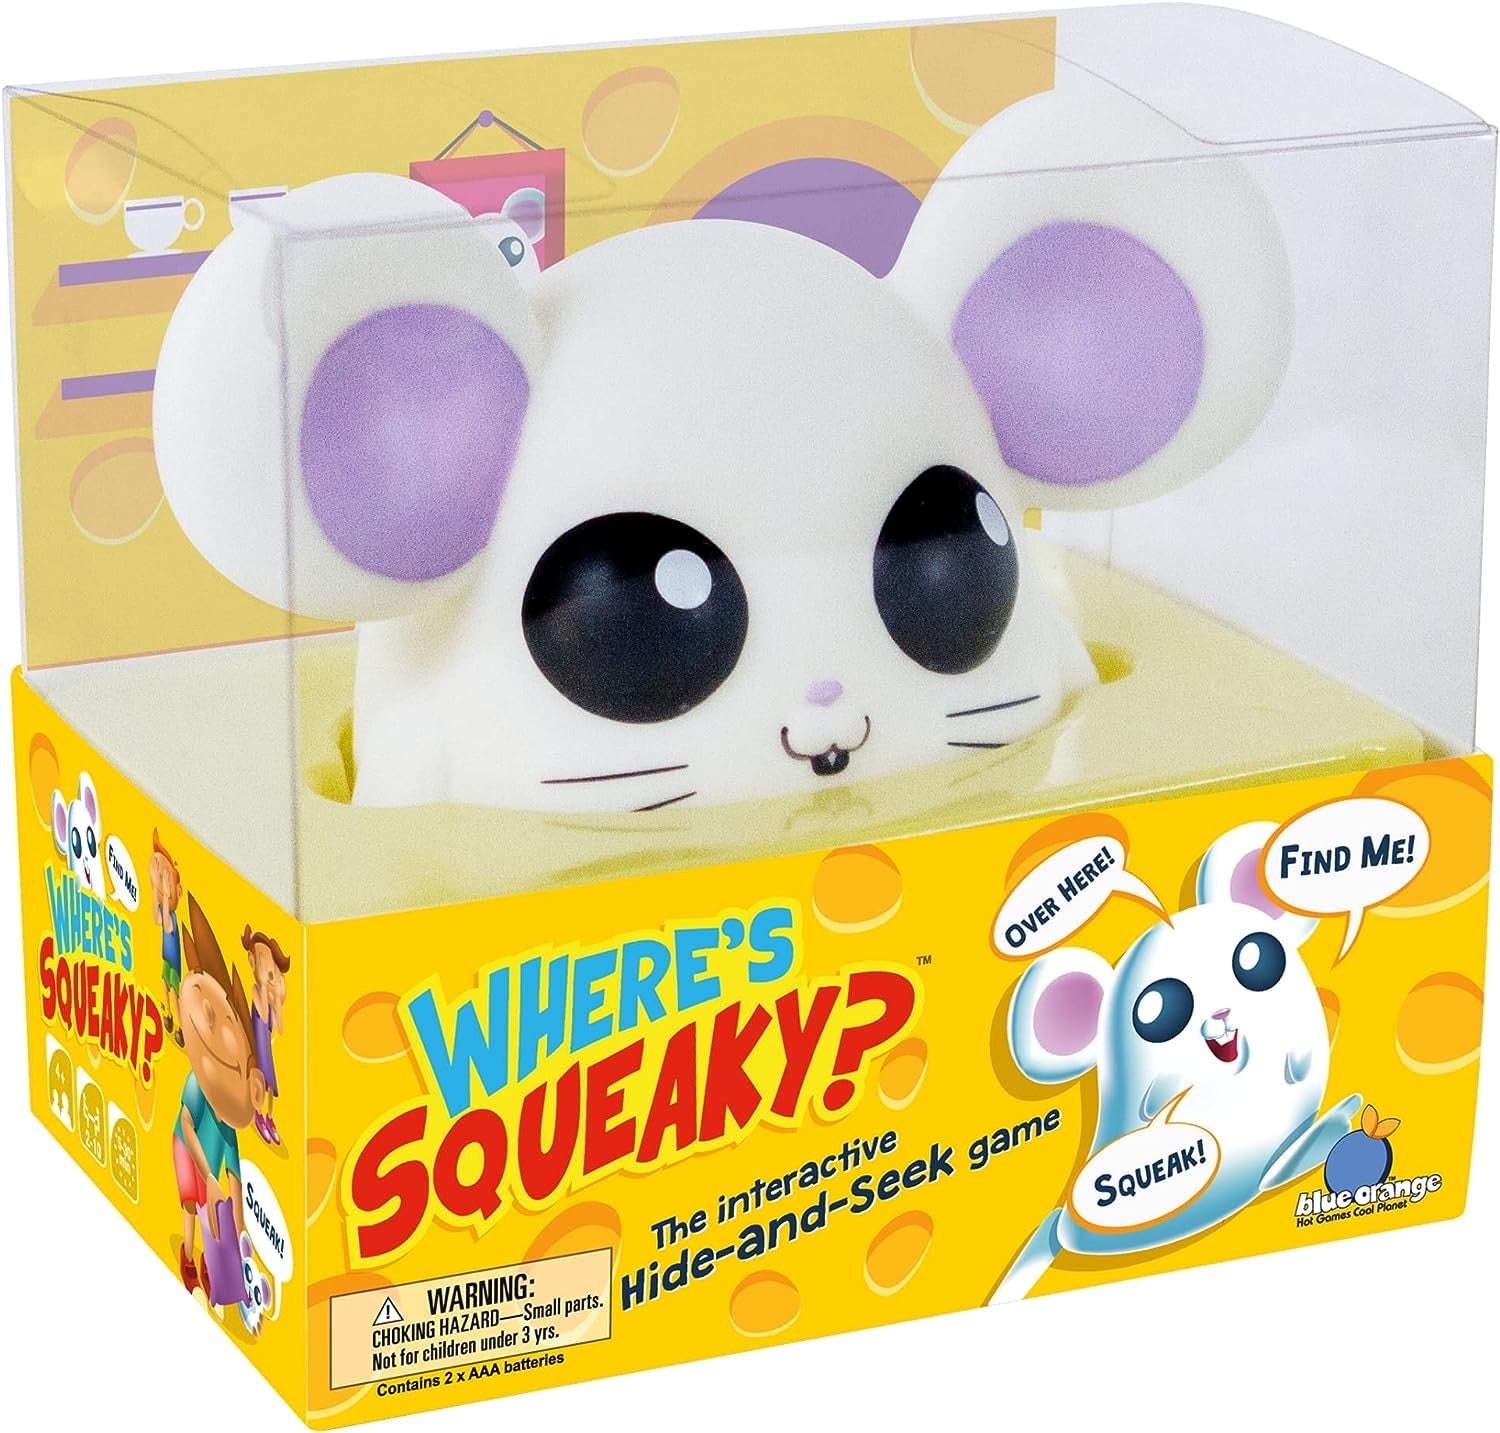 Where’s Squeaky? by Blue Orange Games #09026